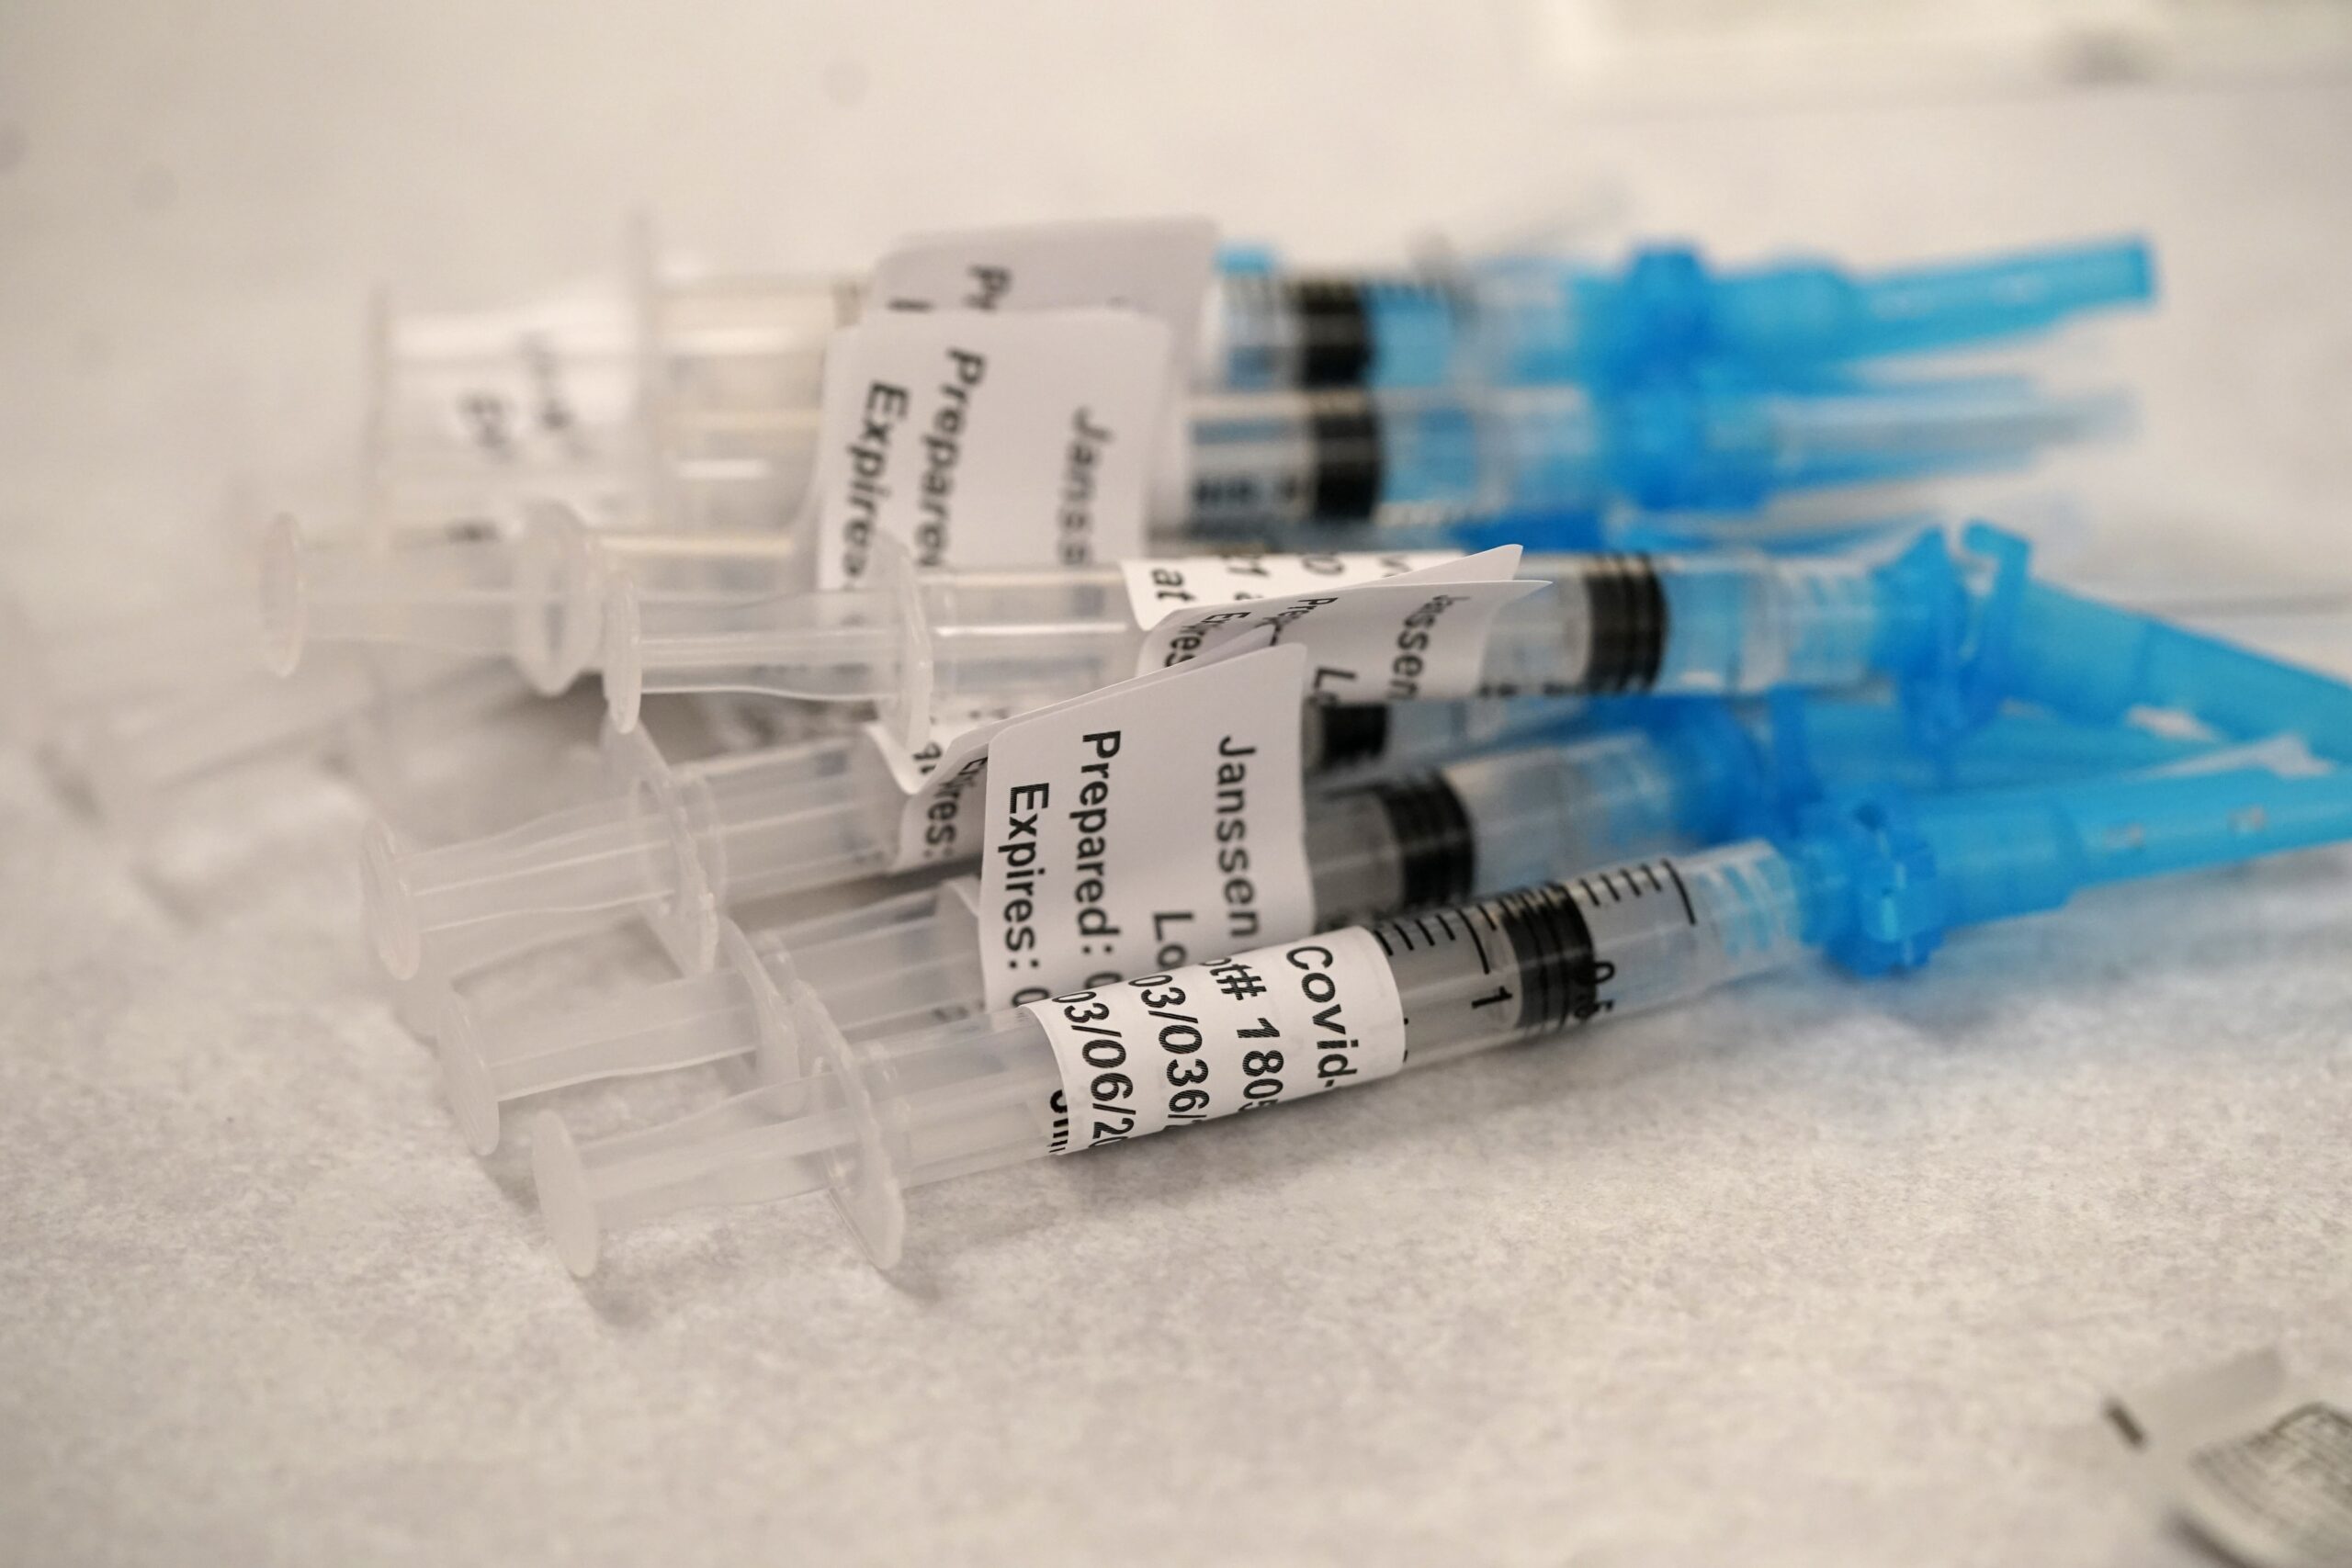 Syringes loaded with shots of Johnson & Johnson COVID-19 vaccine